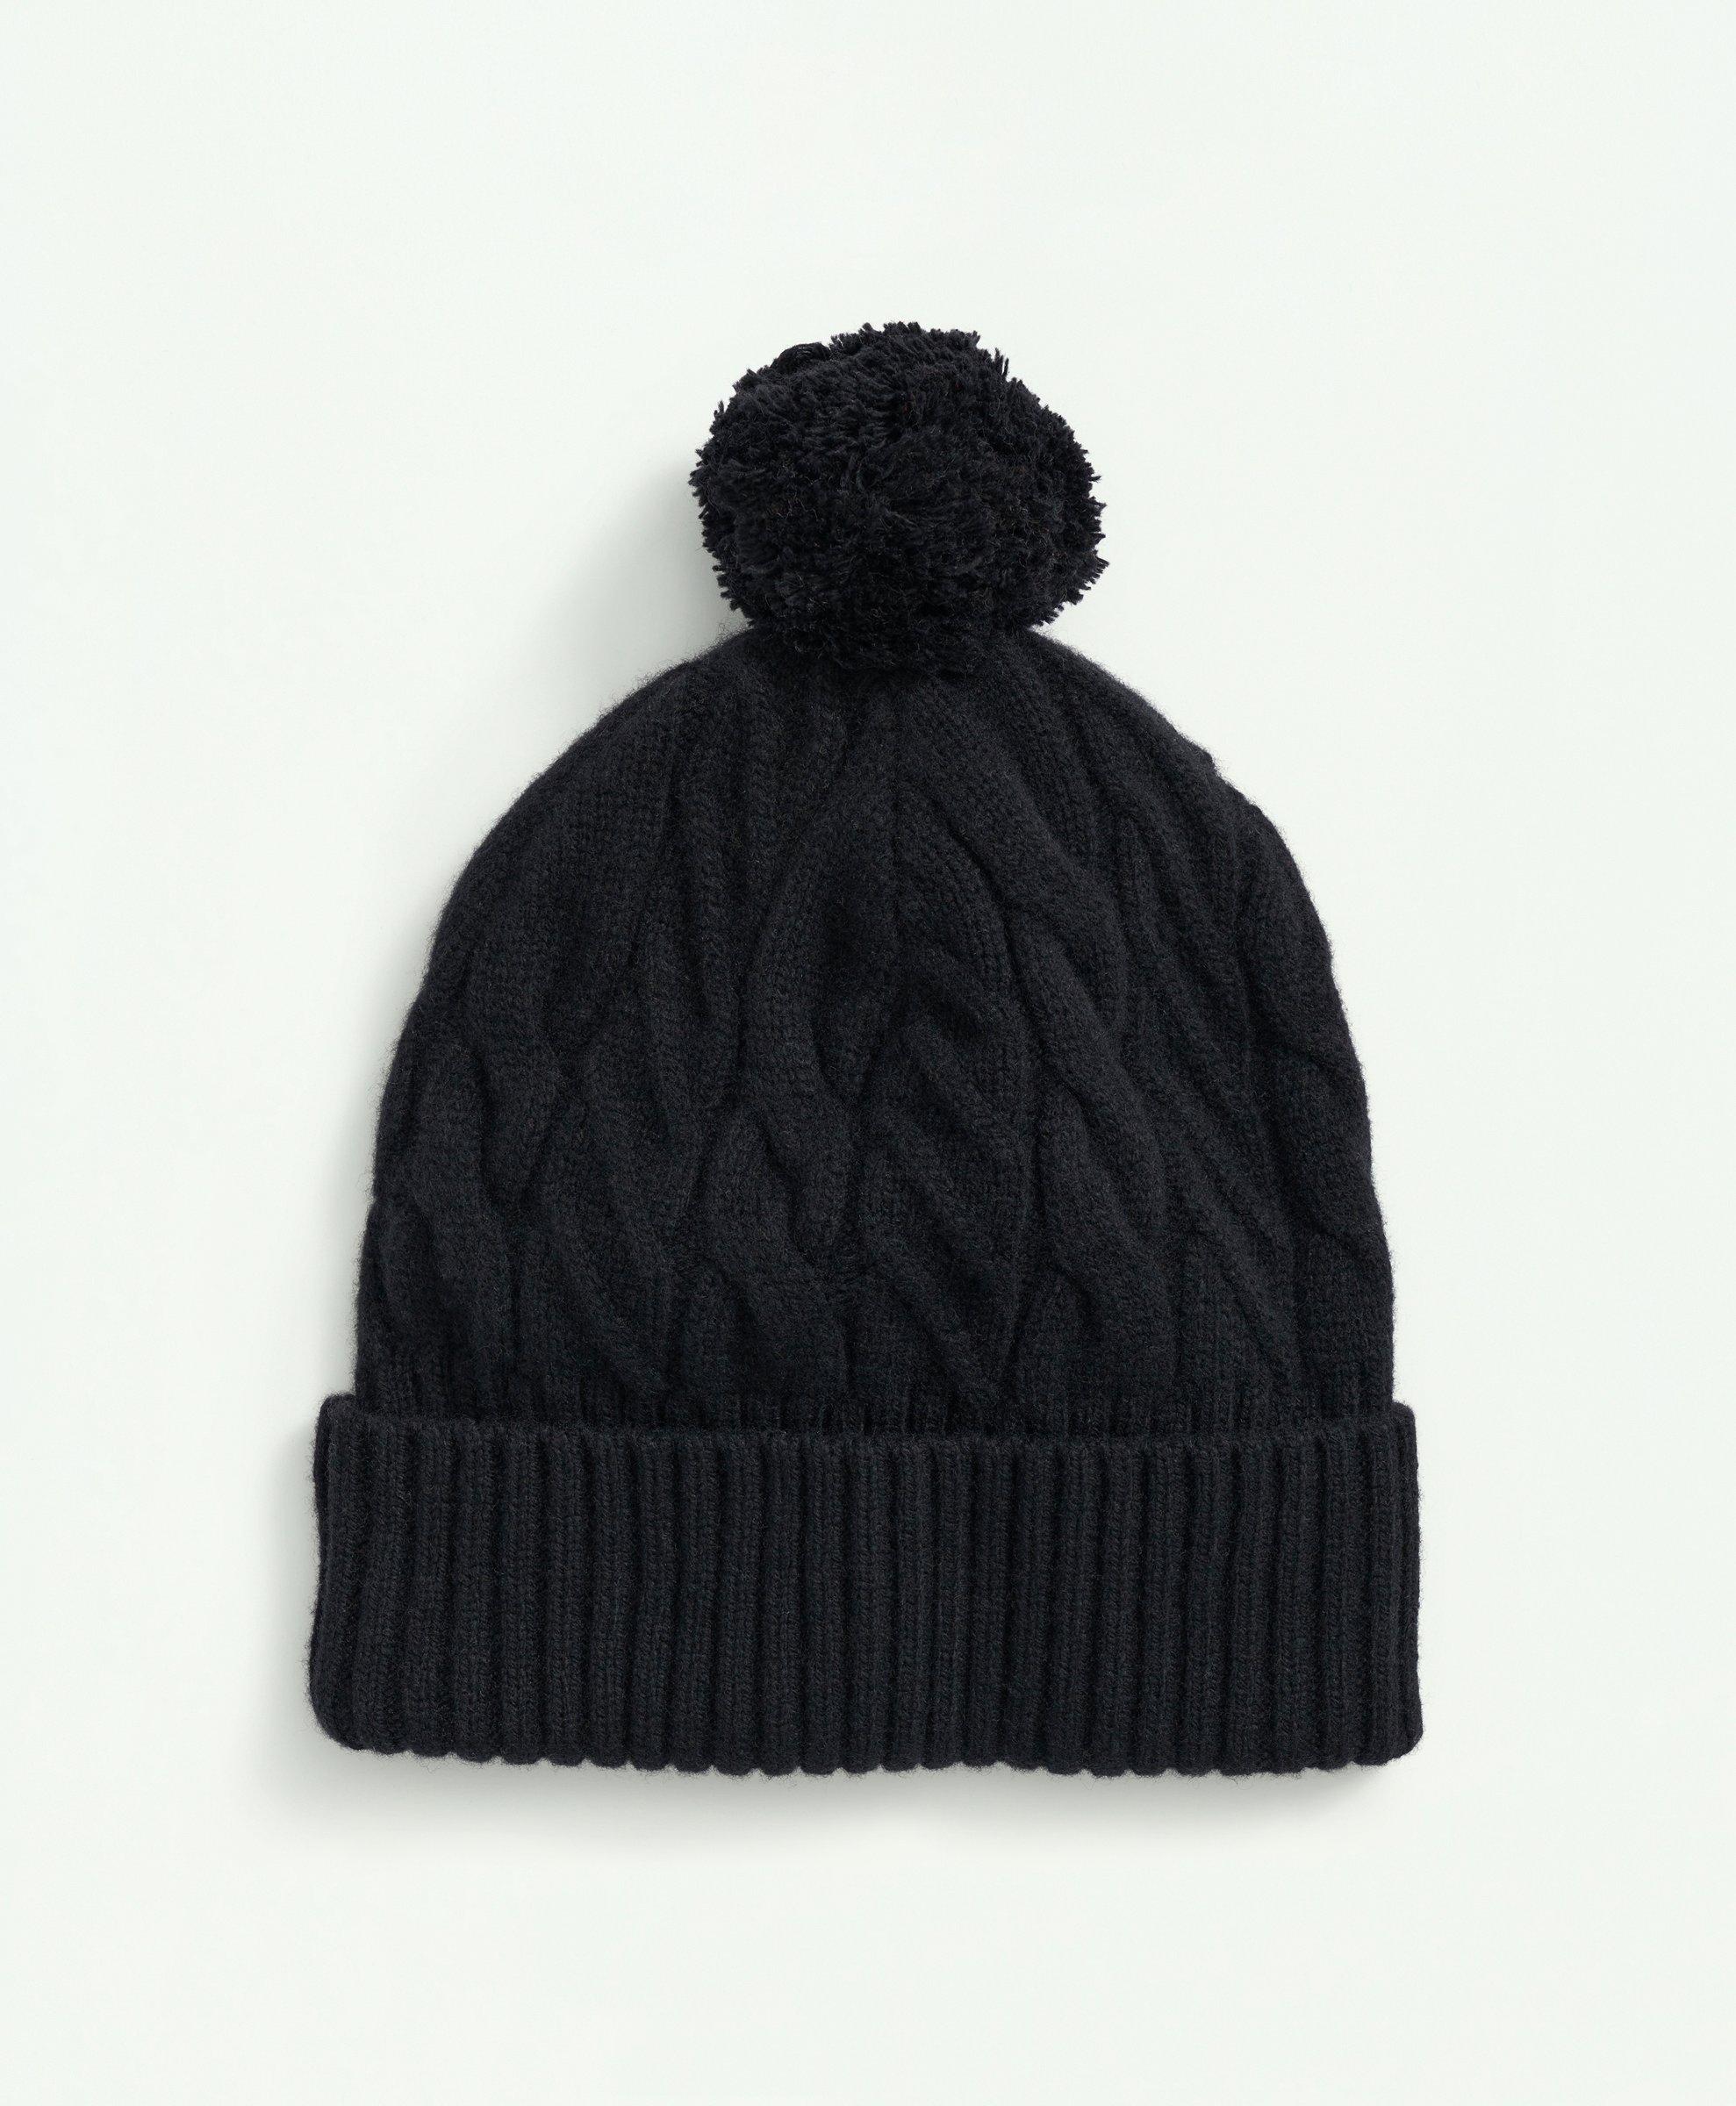 Merino Wool and Cashmere Pom Cable Beanie Blend Knit